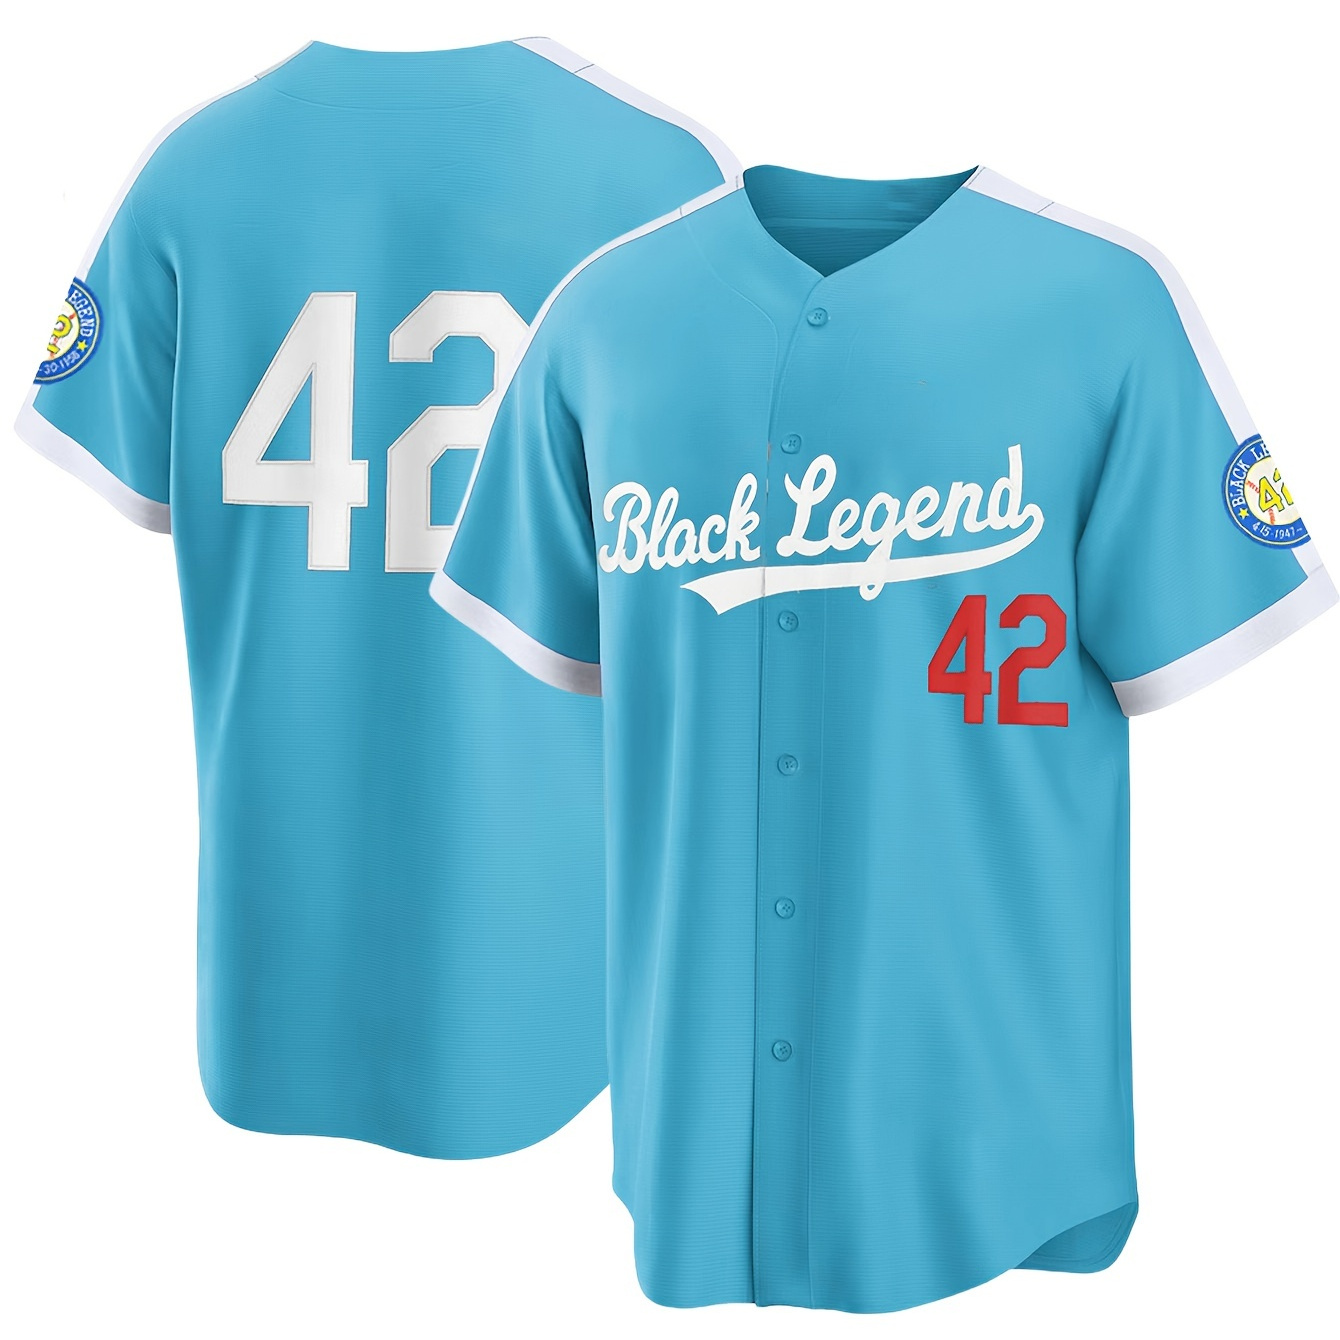 Men's Black Legend #42 Baseball Jersey, Retro Classic Baseball Shirt,  Slightly Stretch Breathable Embroidery Button Up Sports Uniform For  Training Competition Party - Temu